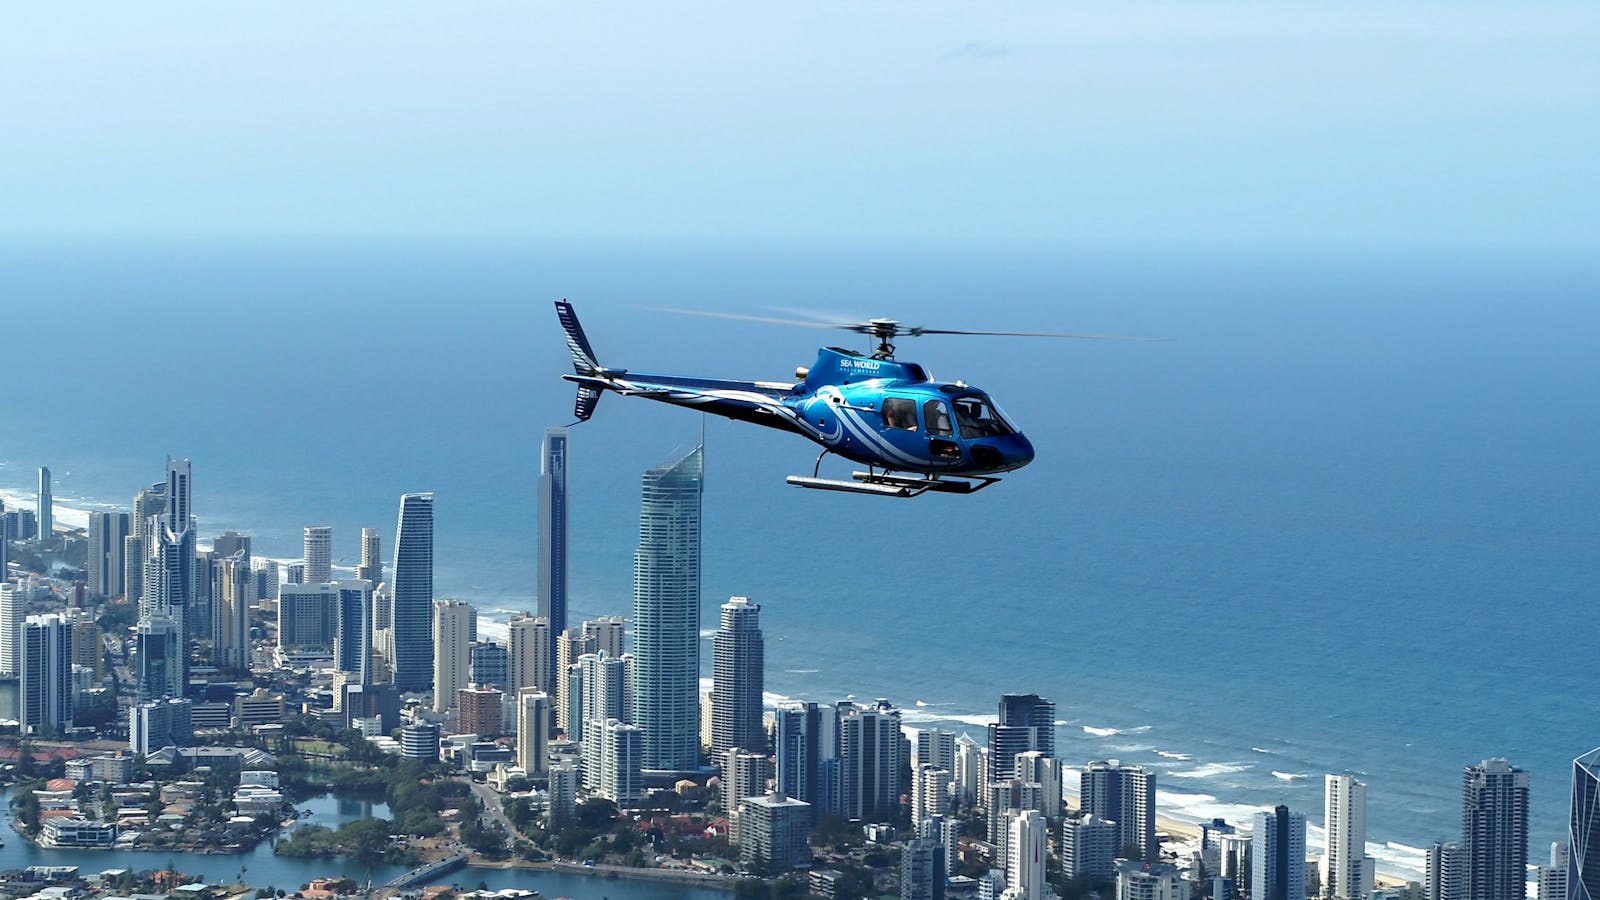 Sea World Helicopters Q1 Gold Coast